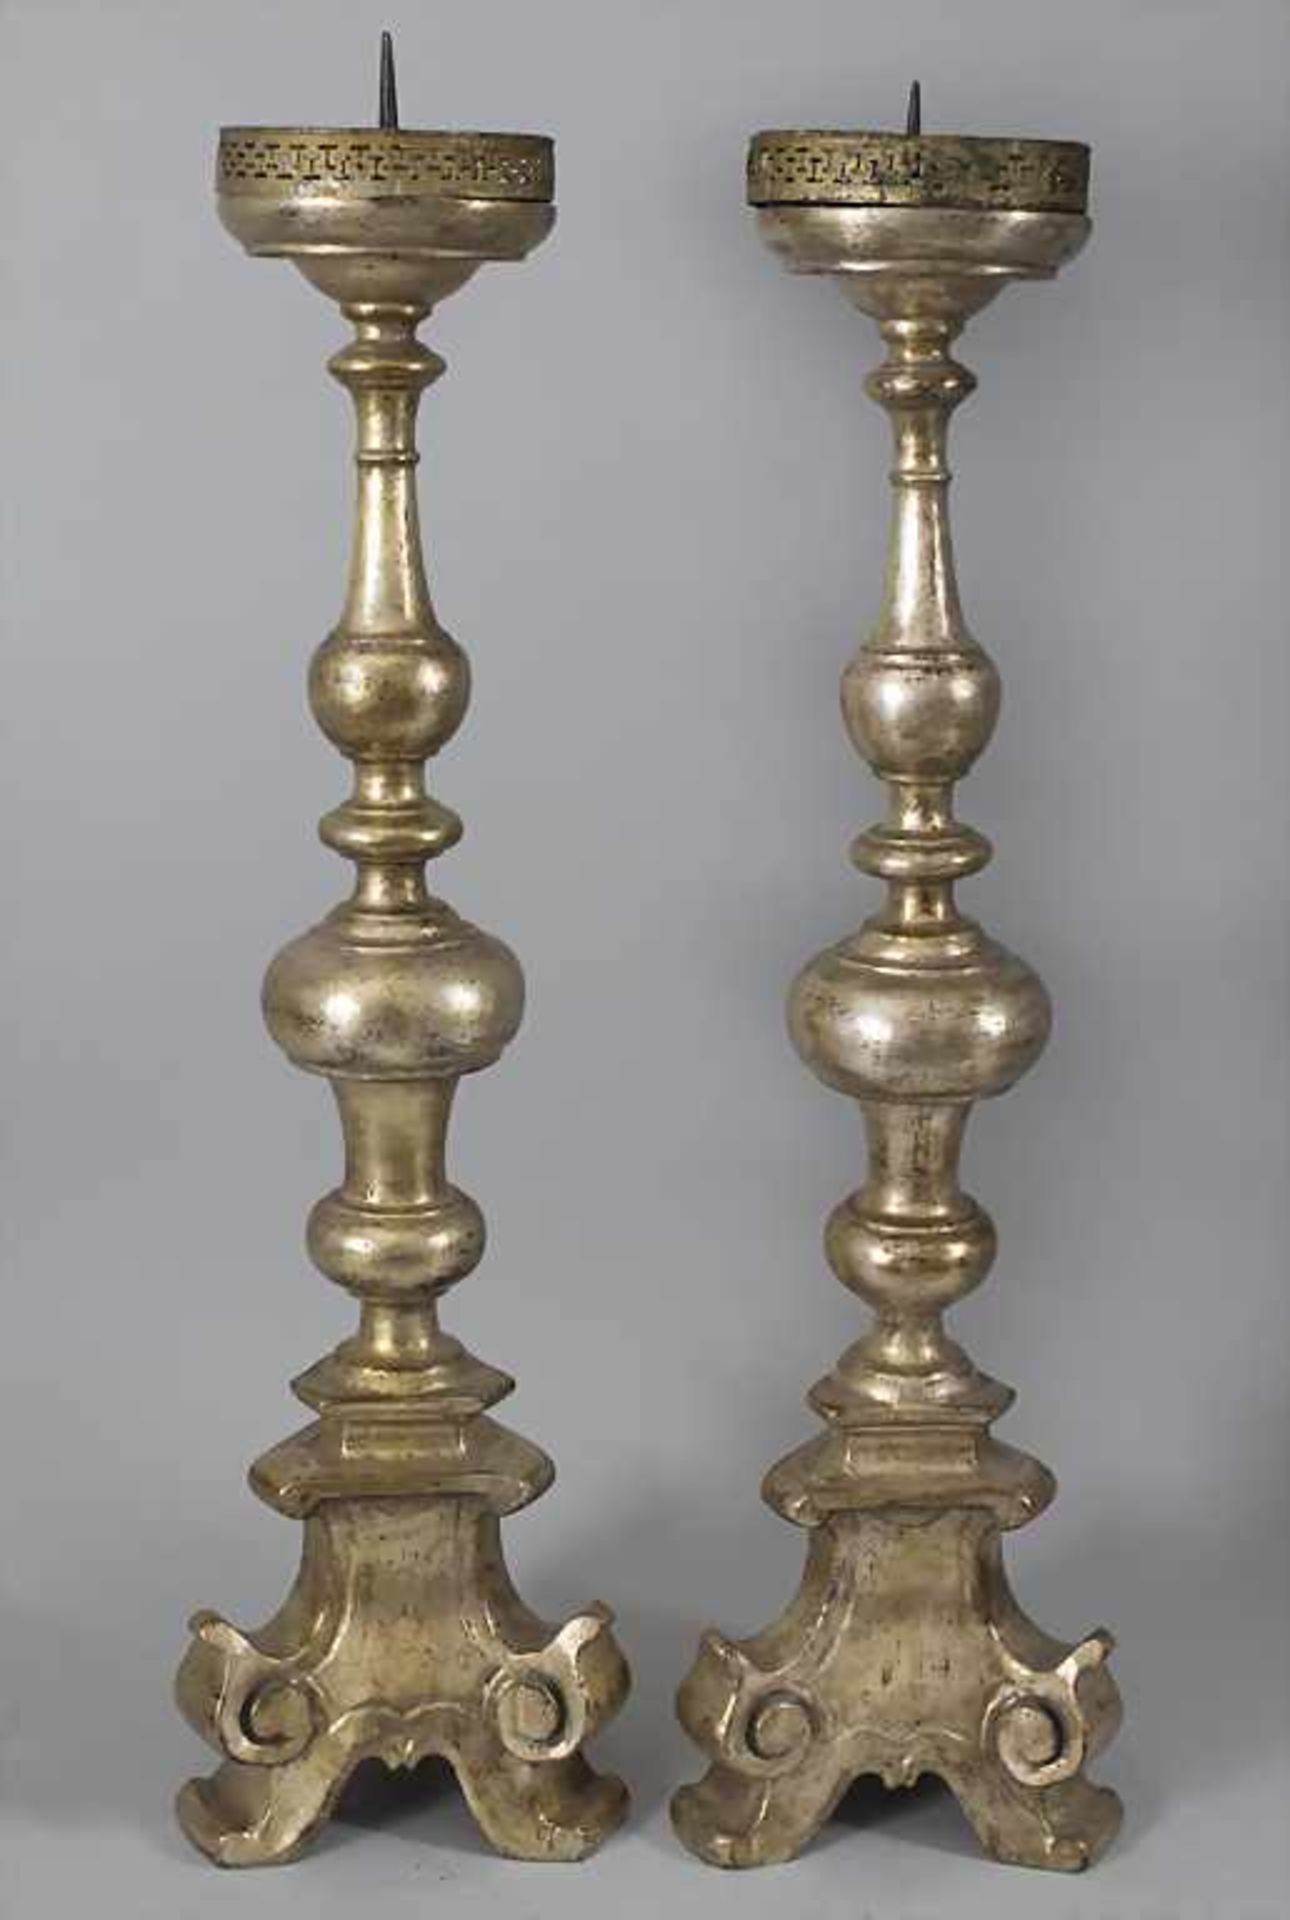 Paar Altarleuchter mit Rocailledekor / A pair of altar candleholders with rocailles, 18./19. Jh. - Image 2 of 3